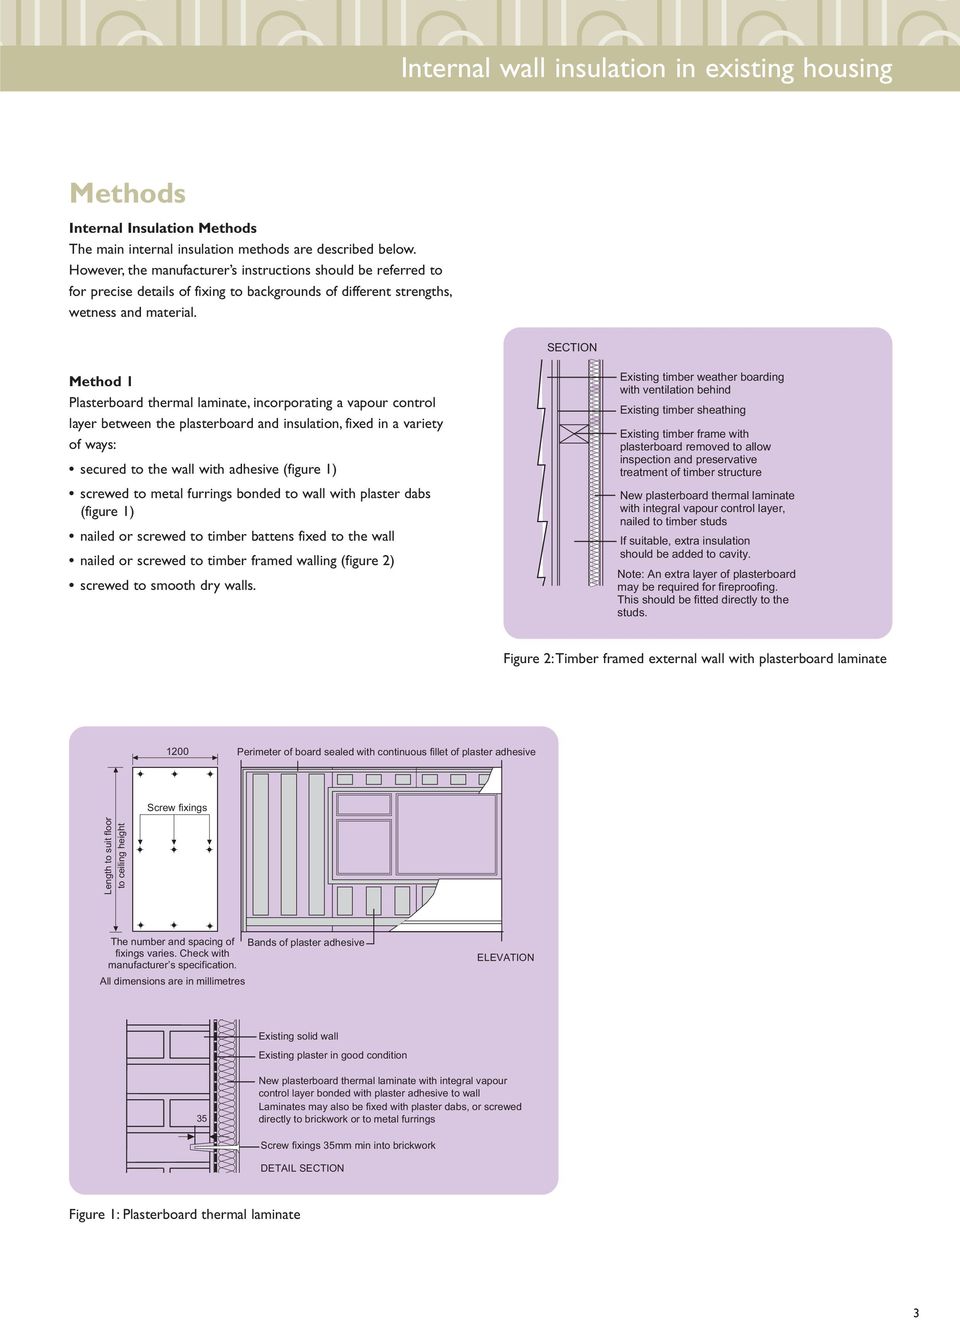 SECTION Method 1 Plasterboard thermal laminate, incorporating a vapour control layer between the plasterboard and insulation, fixed in a variety of ways: secured to the wall with adhesive (figure 1)